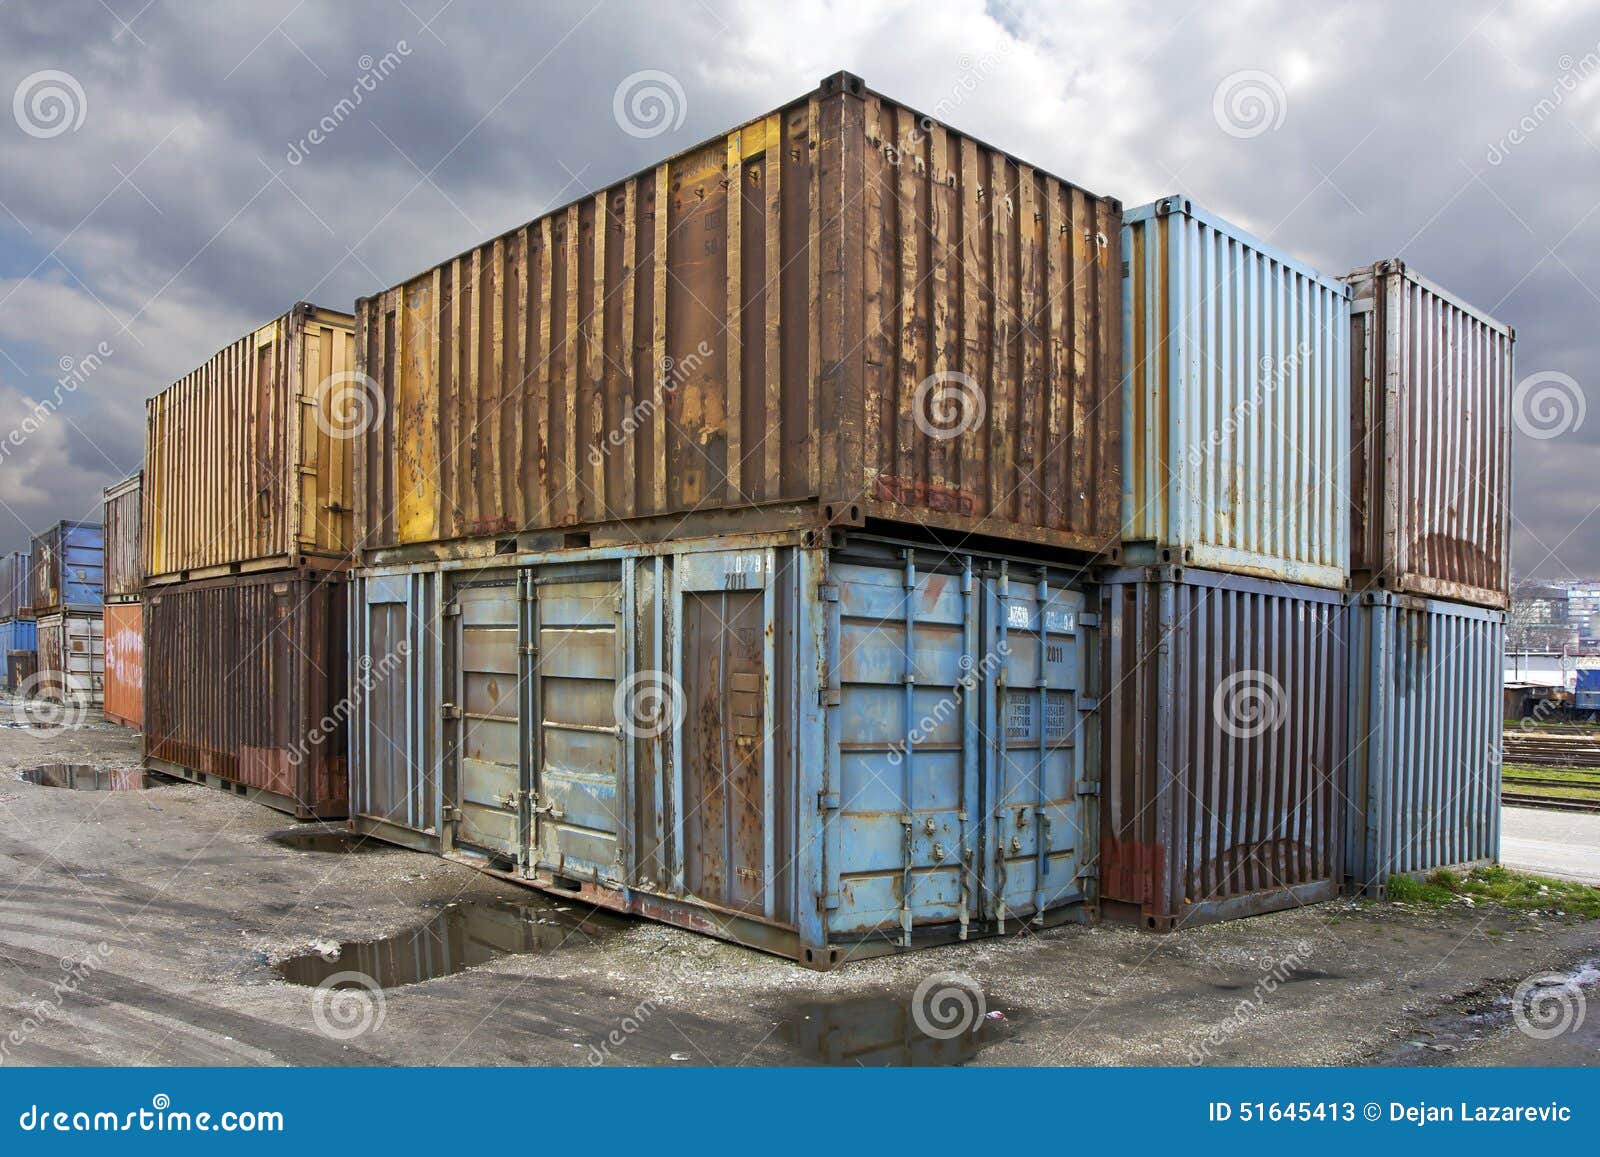 http://thumbs.dreamstime.com/z/oude-containers-51645413.jpg